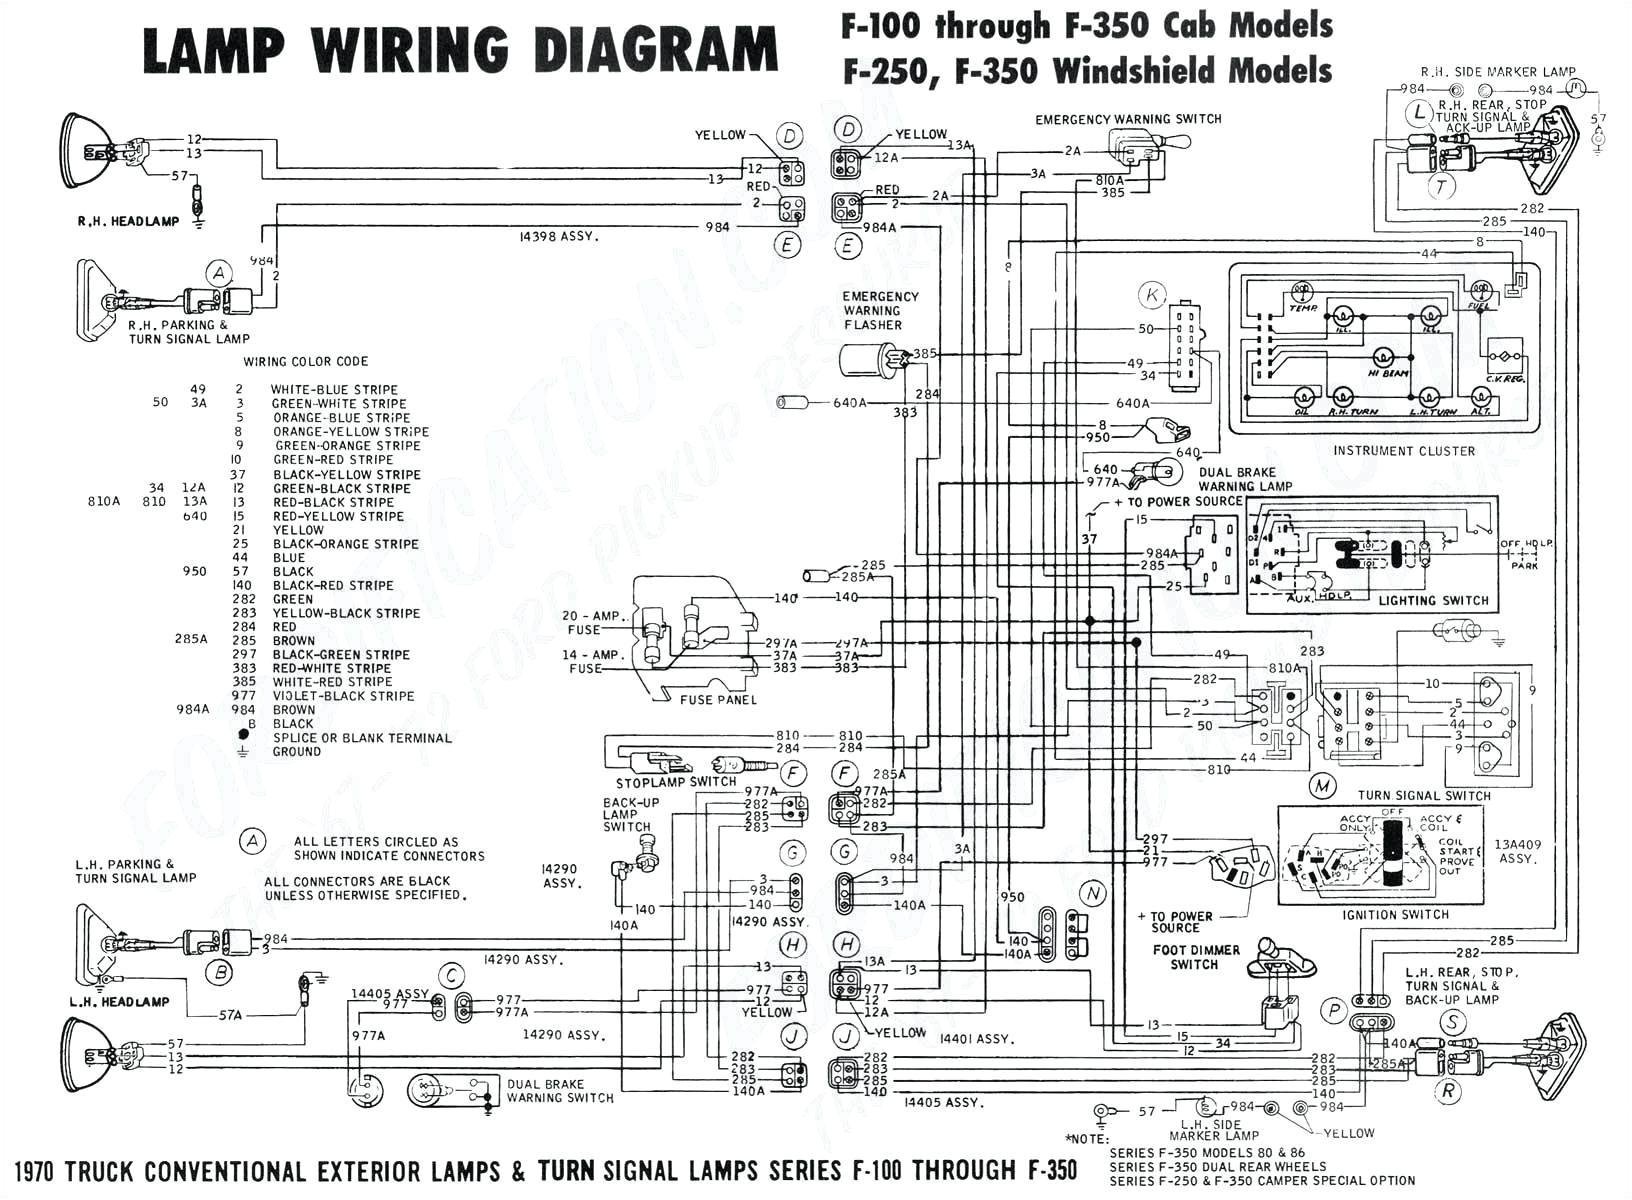 ignition wiring diagram 1976 35hp johnson johnson ignition coil 76 evinrude wiring diagram